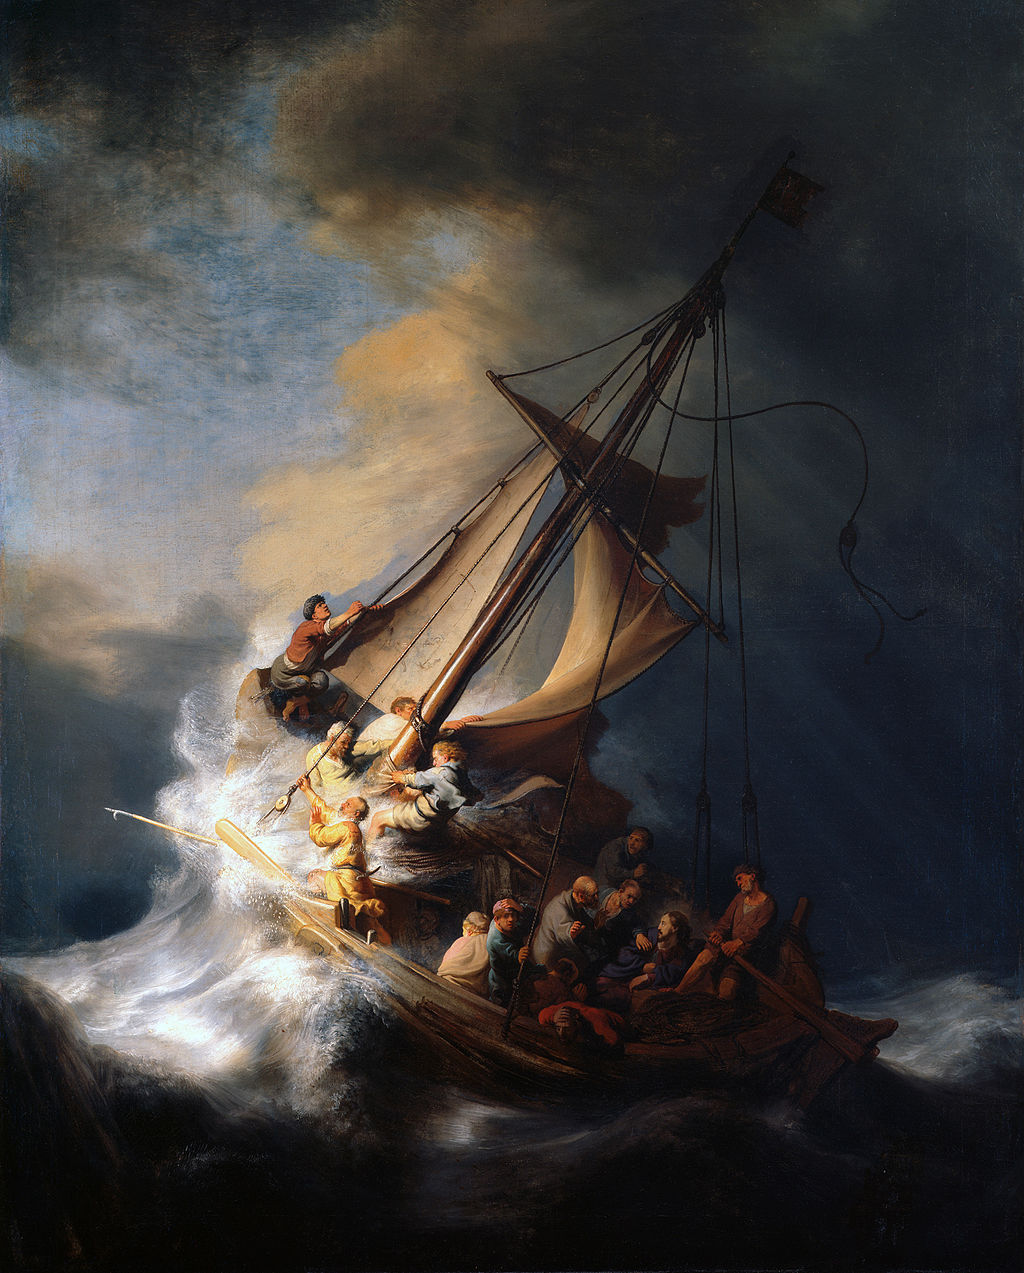 Painting by Rembrandt, via Wikimedia Commons